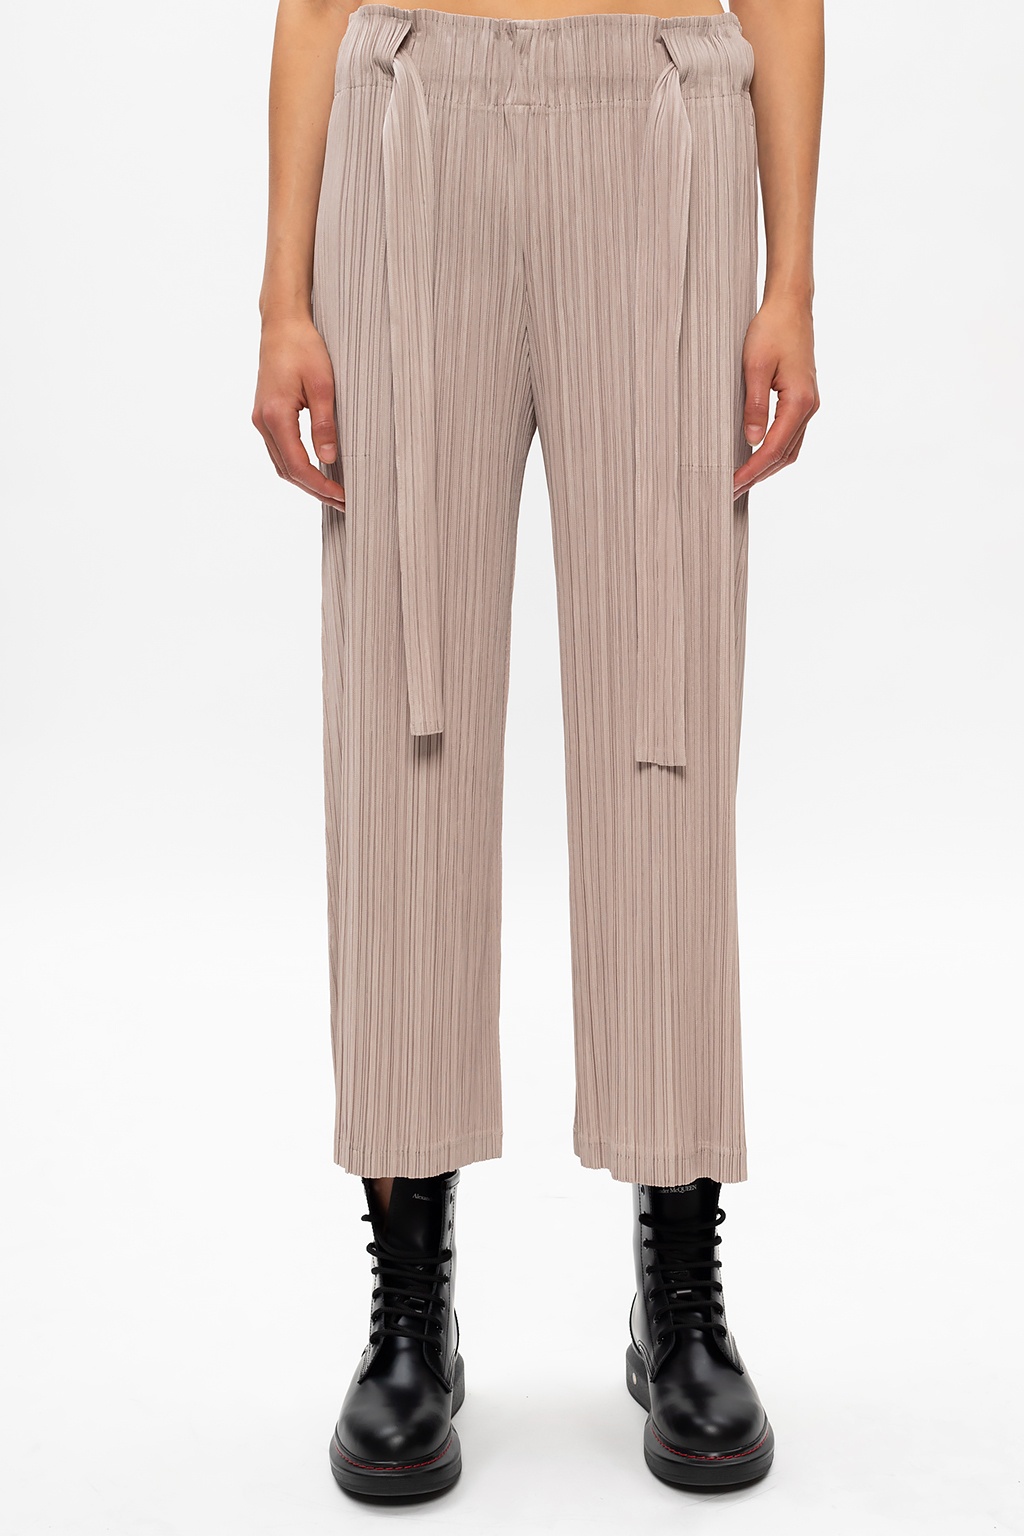 Issey Miyake Pleats Please Pleated trousers | Women's Clothing 